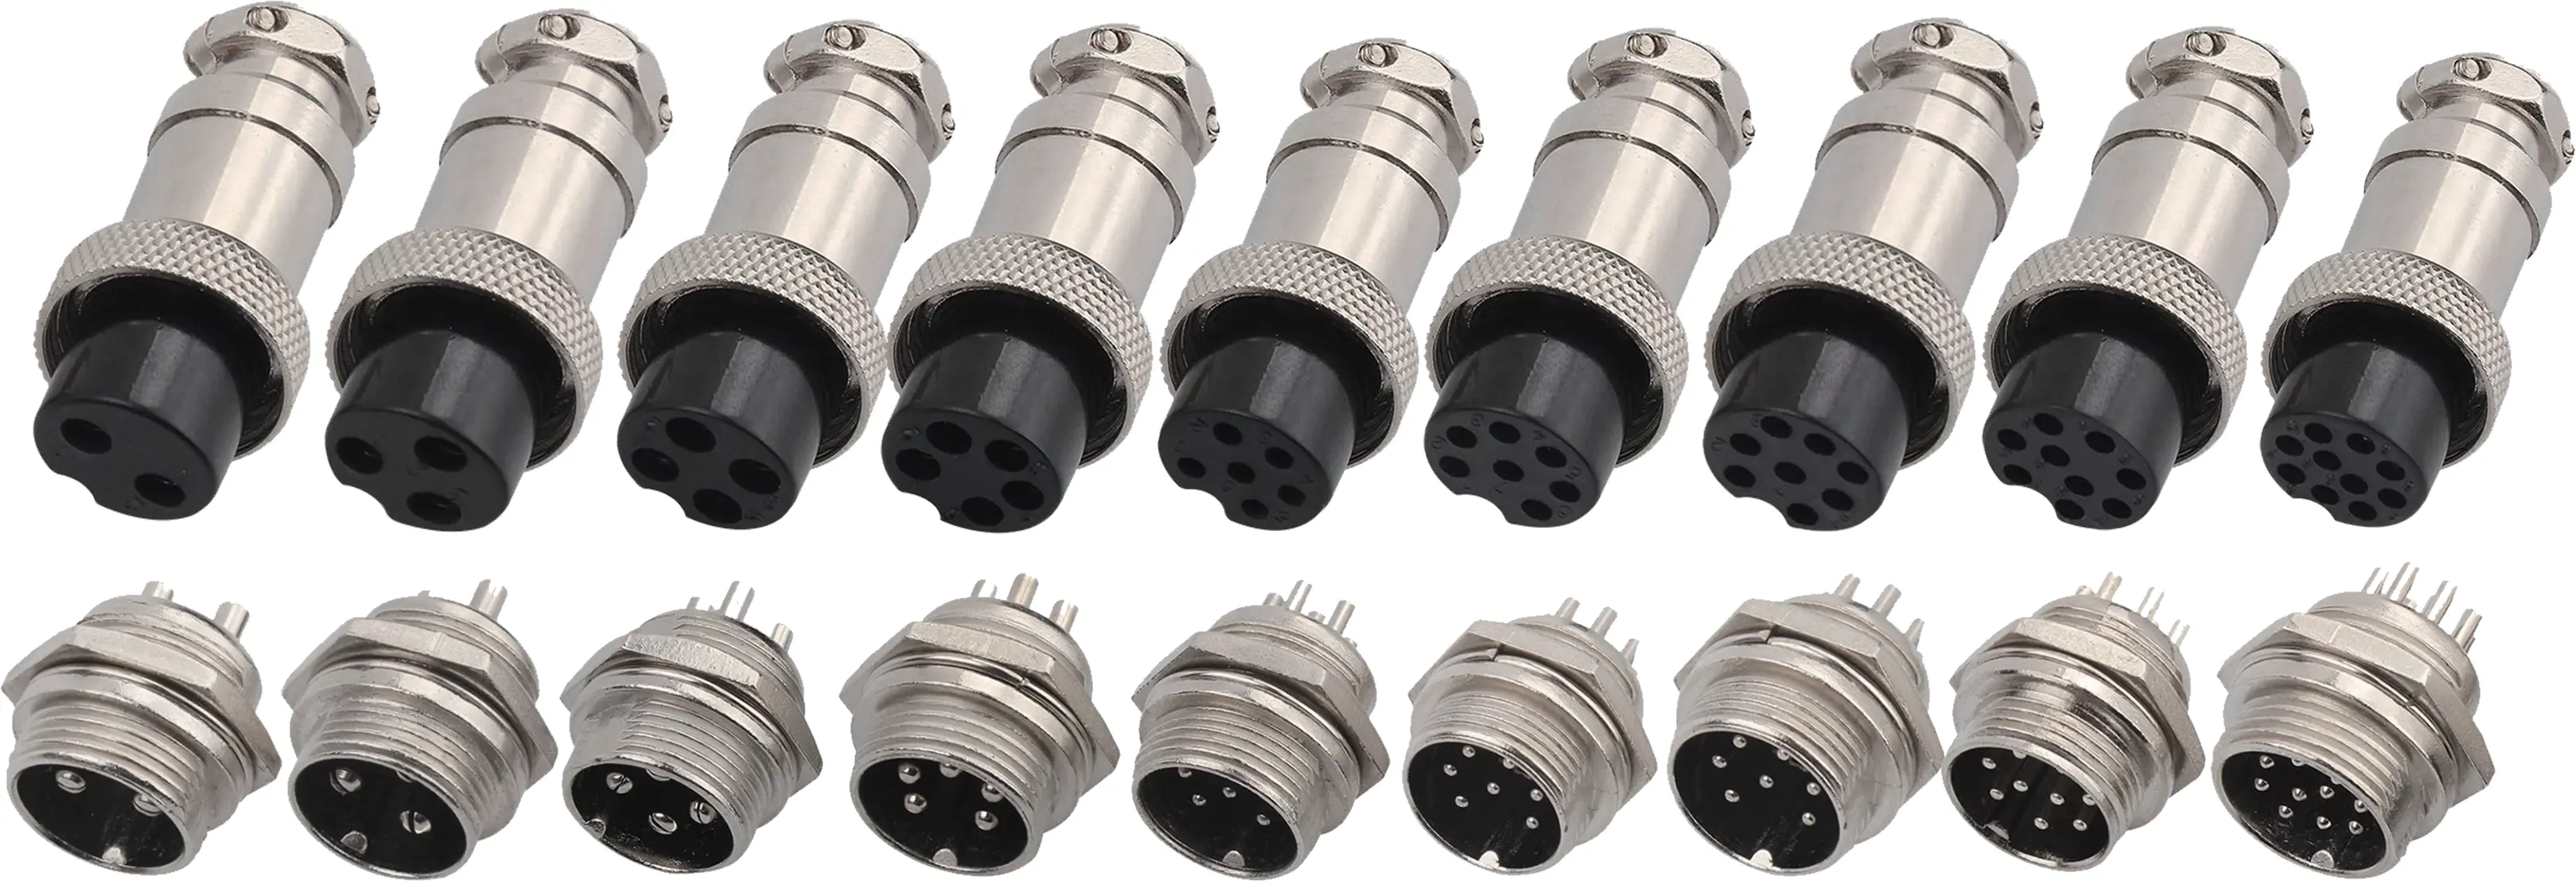 GX16-4pin Cable Connector Round 4-pin aviation nut type connector Plug panel Mounting male and female socket connectors